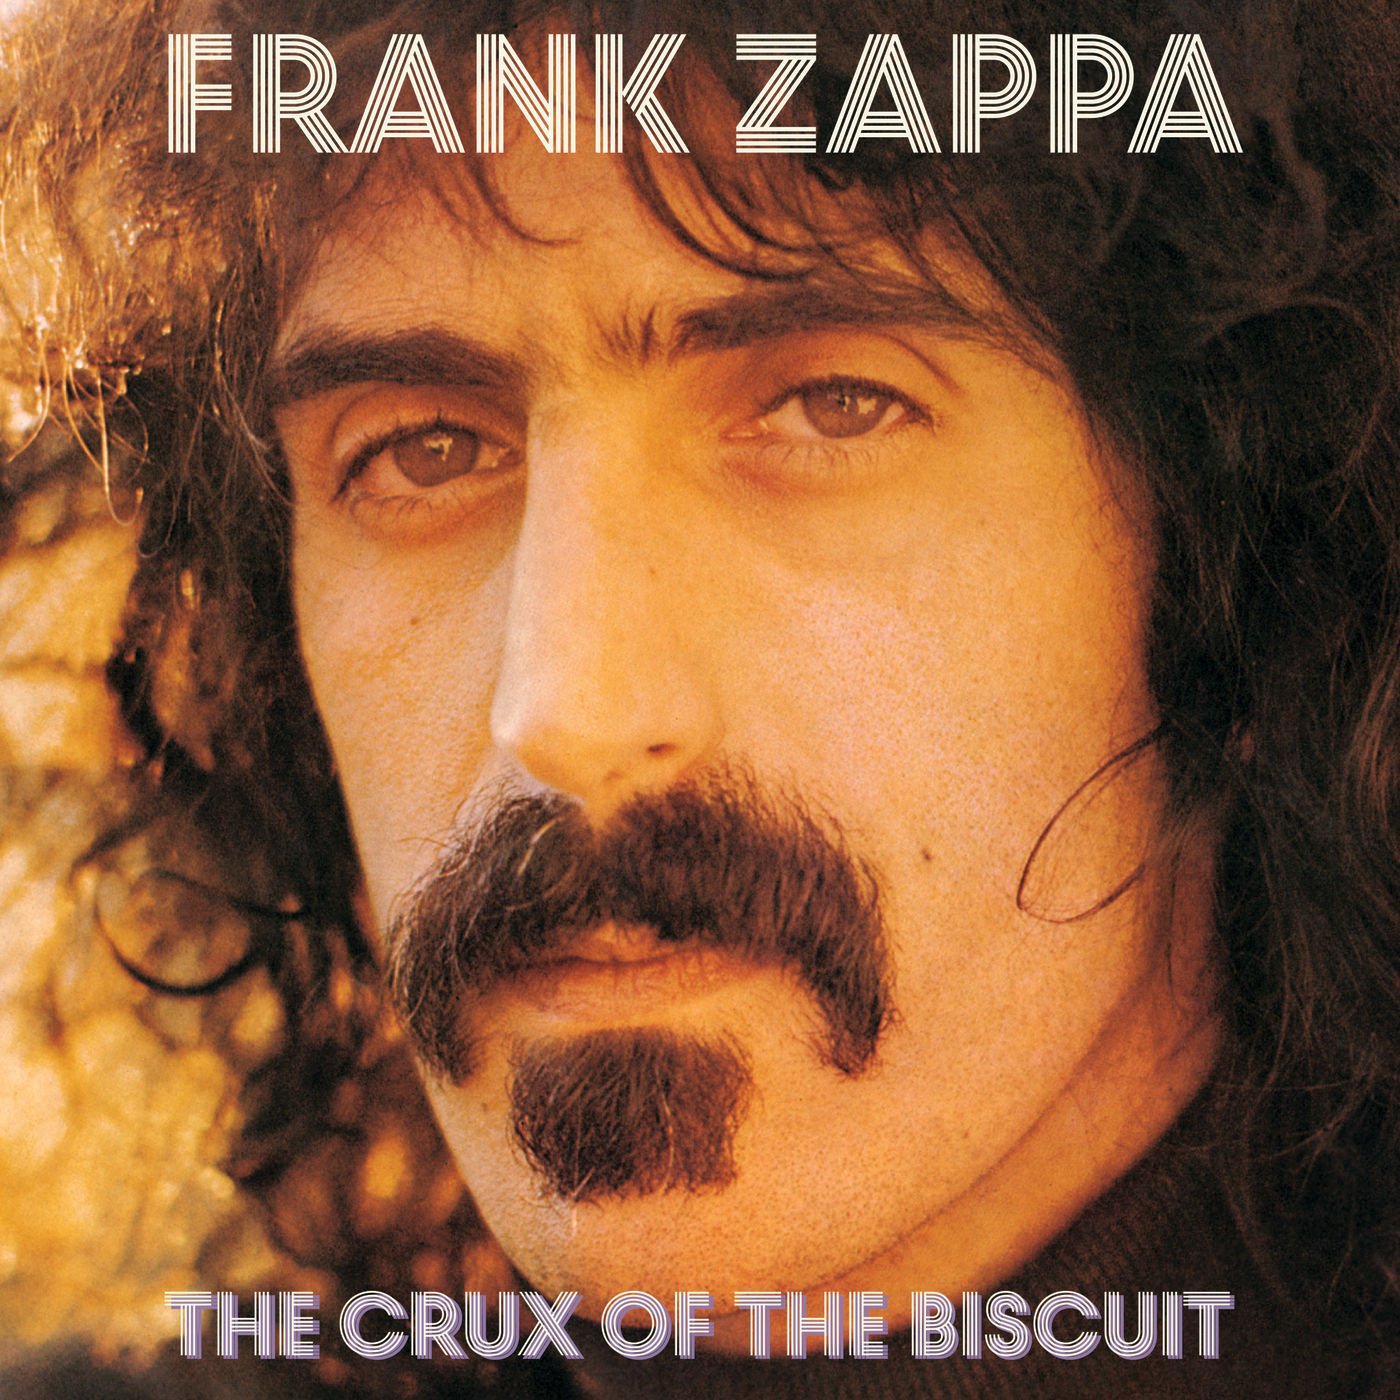 Frank Zappa-The Crux Of The Biscuit-24-96-WEB-FLAC-REMASTERED-2021-OBZEN Download